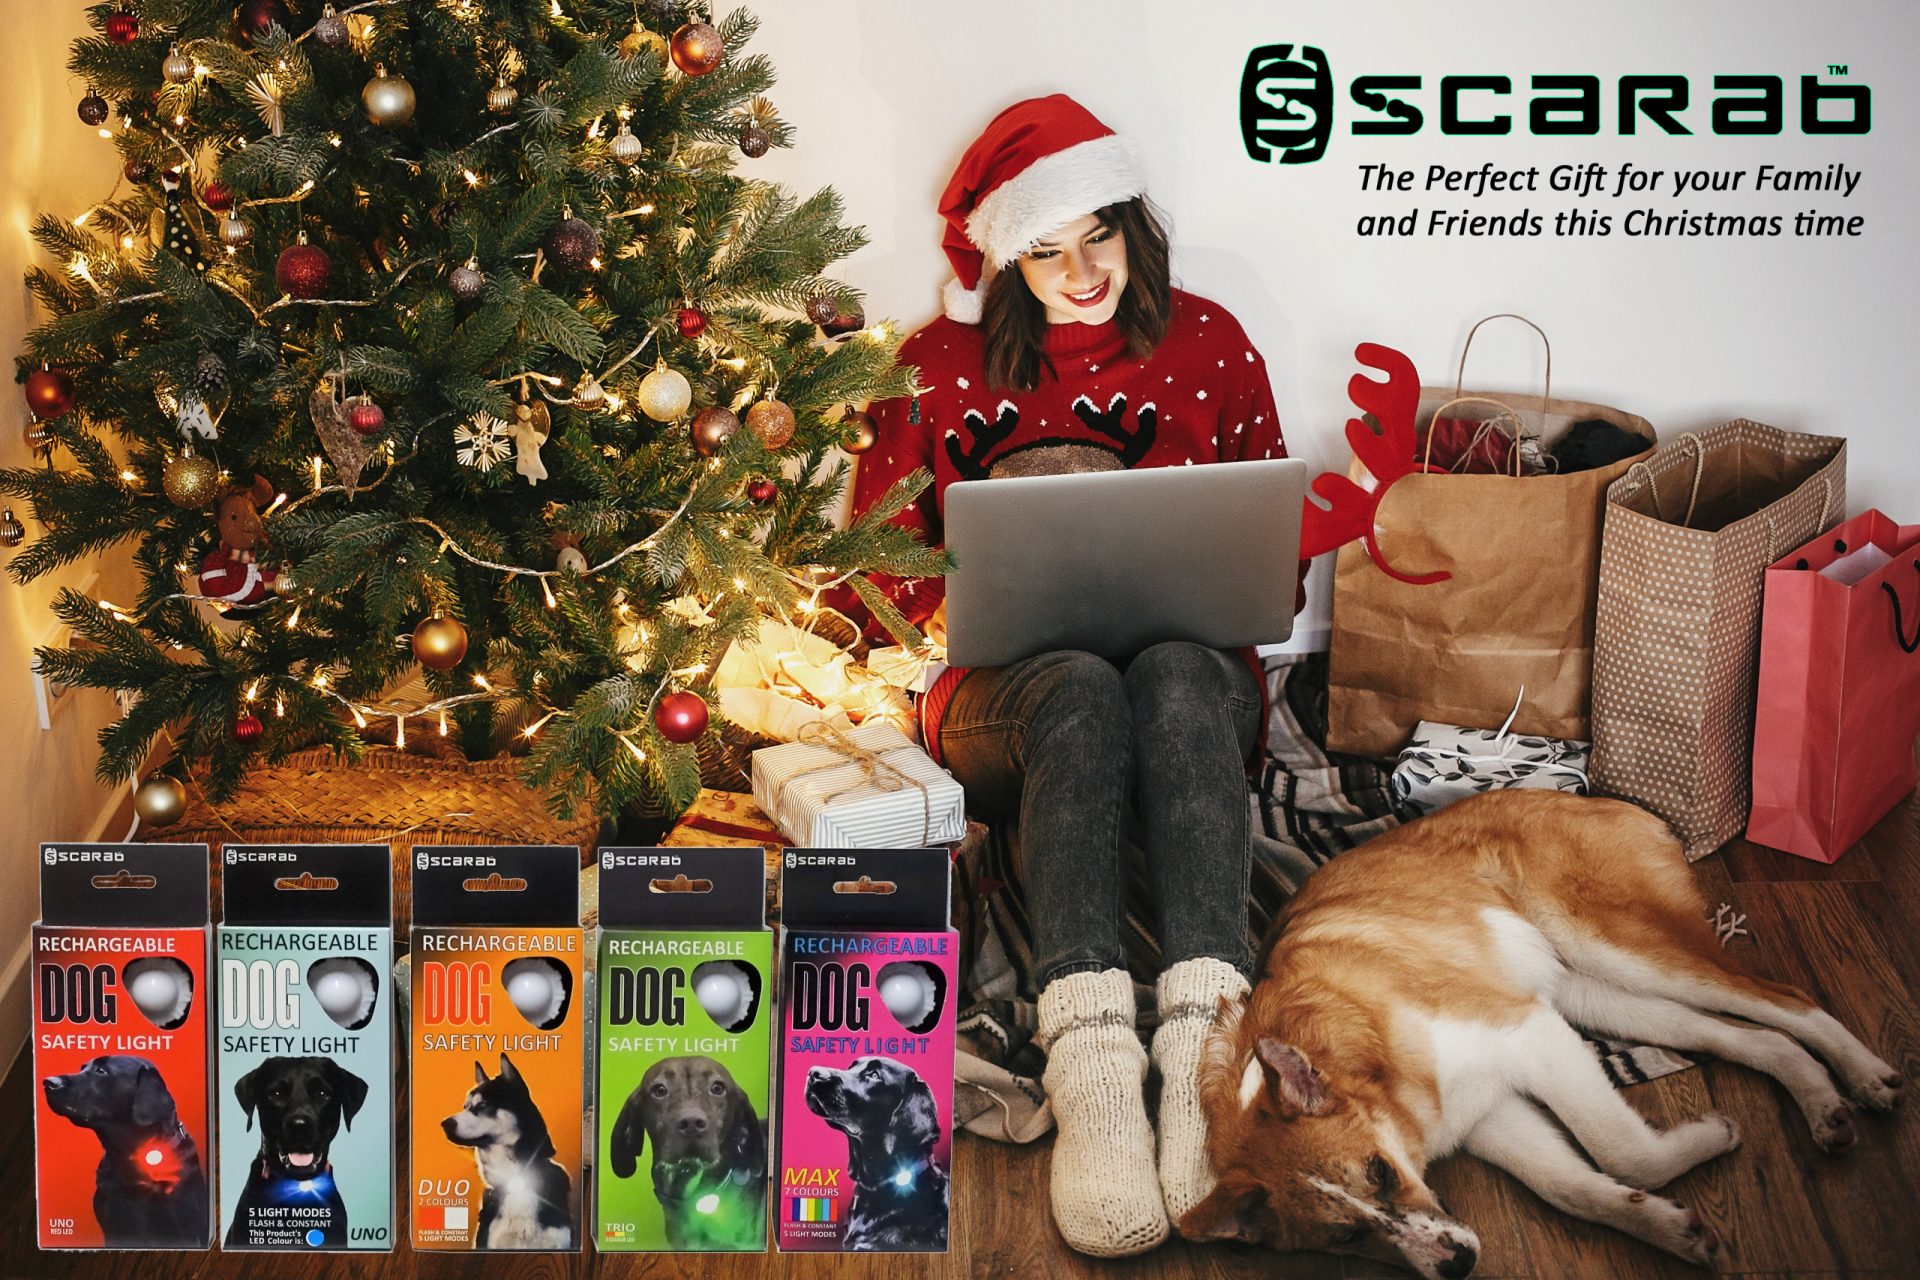 Scarab Dog Light The Perfect Gift for Dog Owners this Christmas